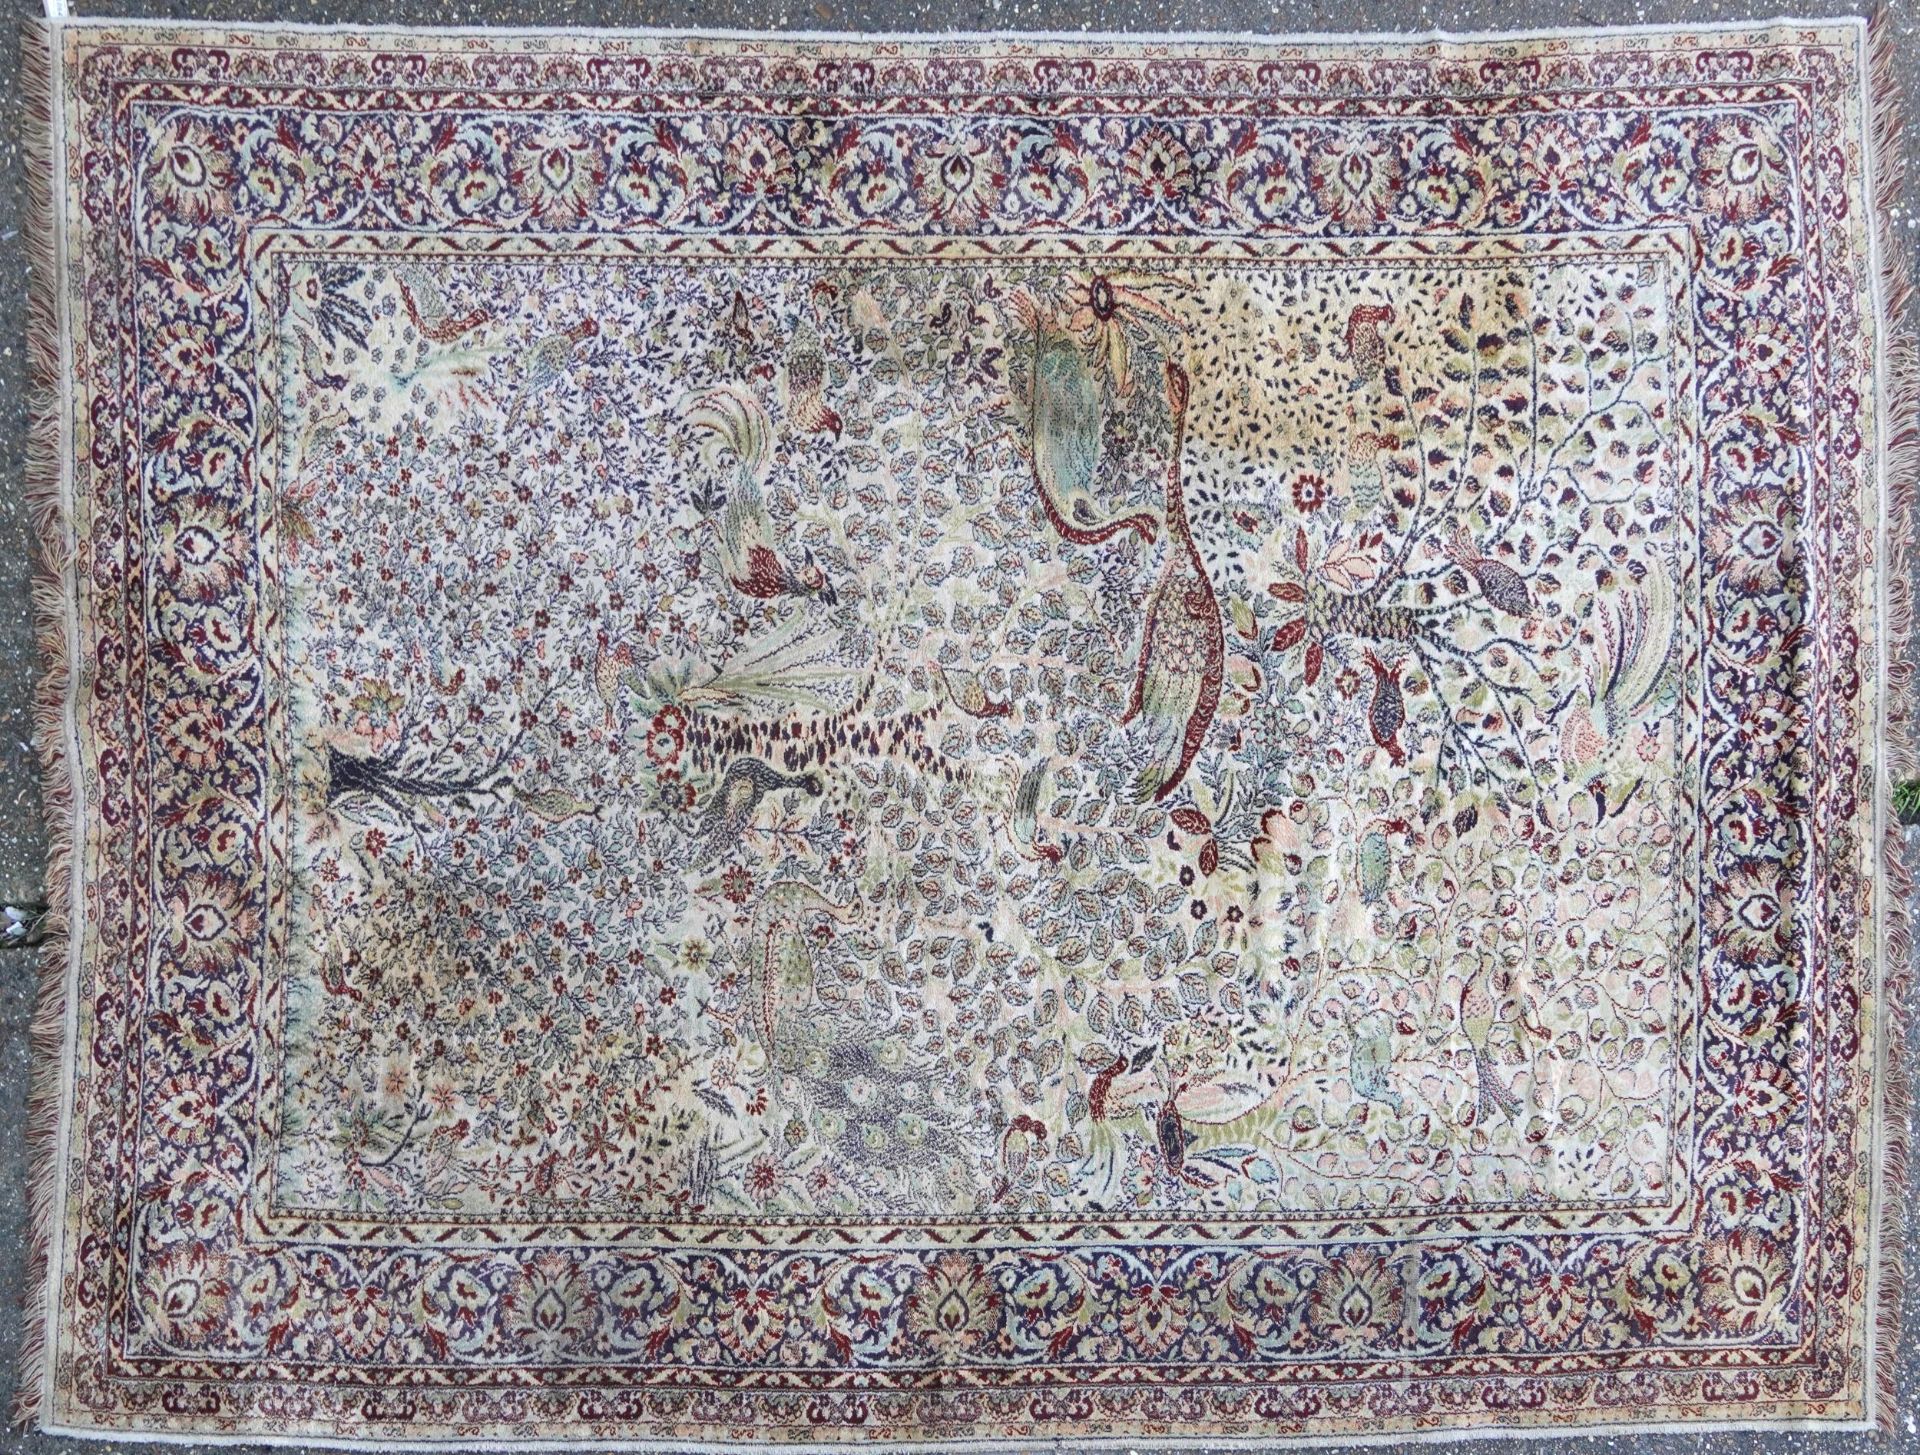 Rectangular Persian carpet, the central field decorated with birds of paradise amongst flowers